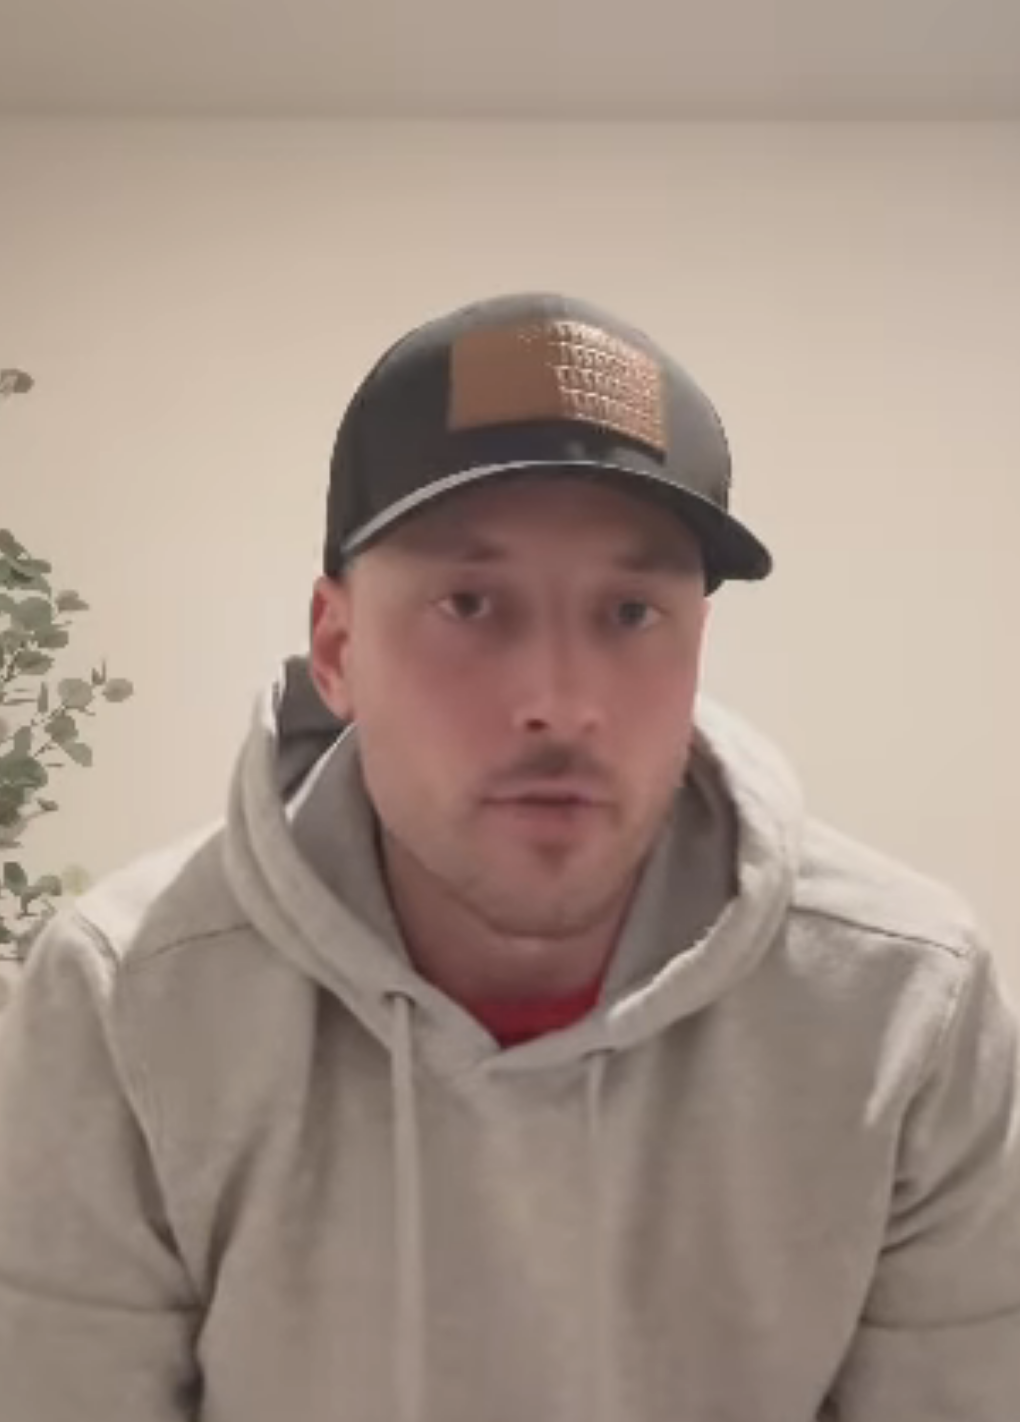 Jeramey in a cap and hoodie speaking on a video